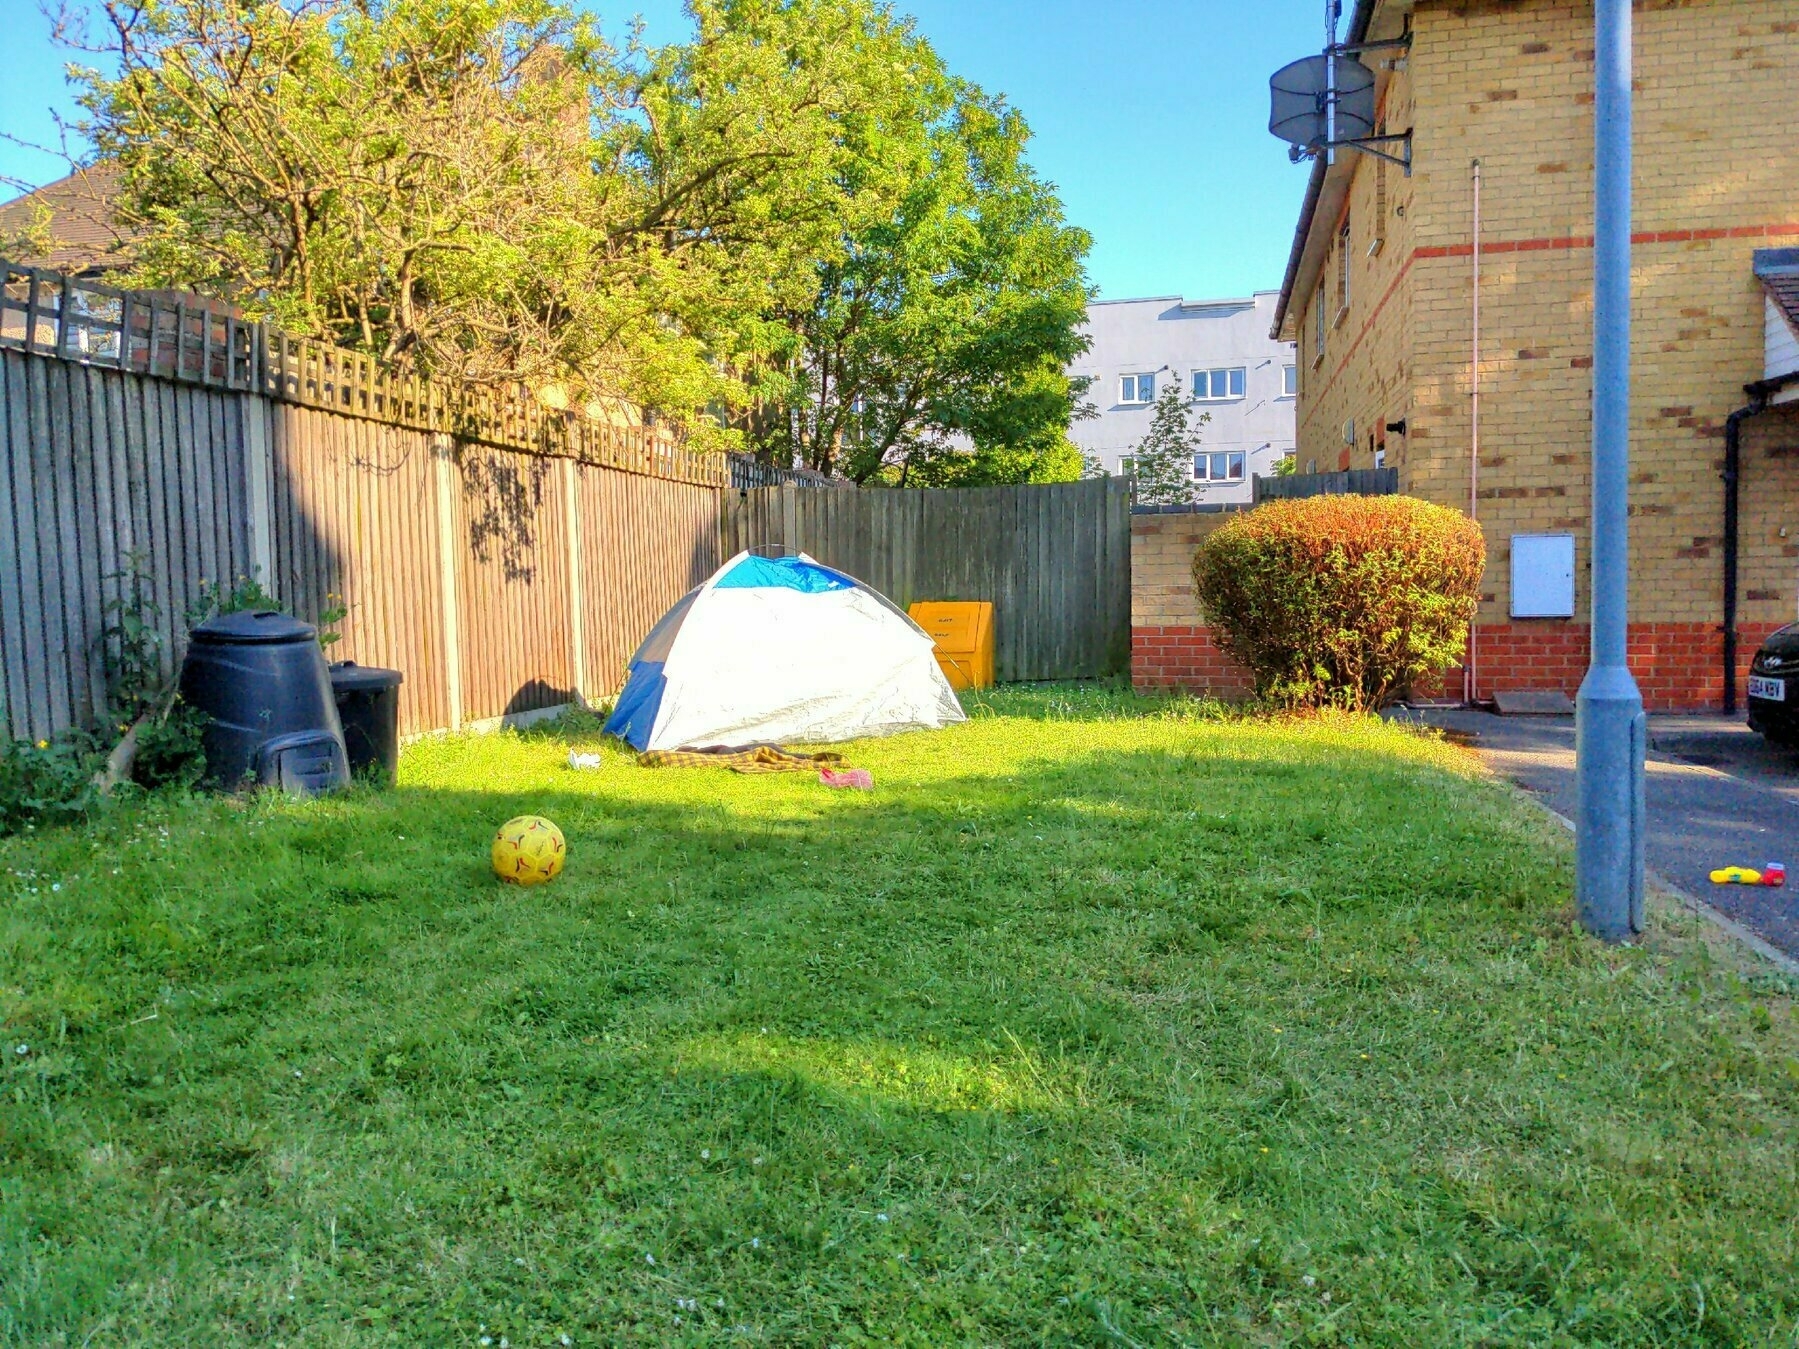 View of our communal garden in early evening sunshine with beach tent set up at the far end.